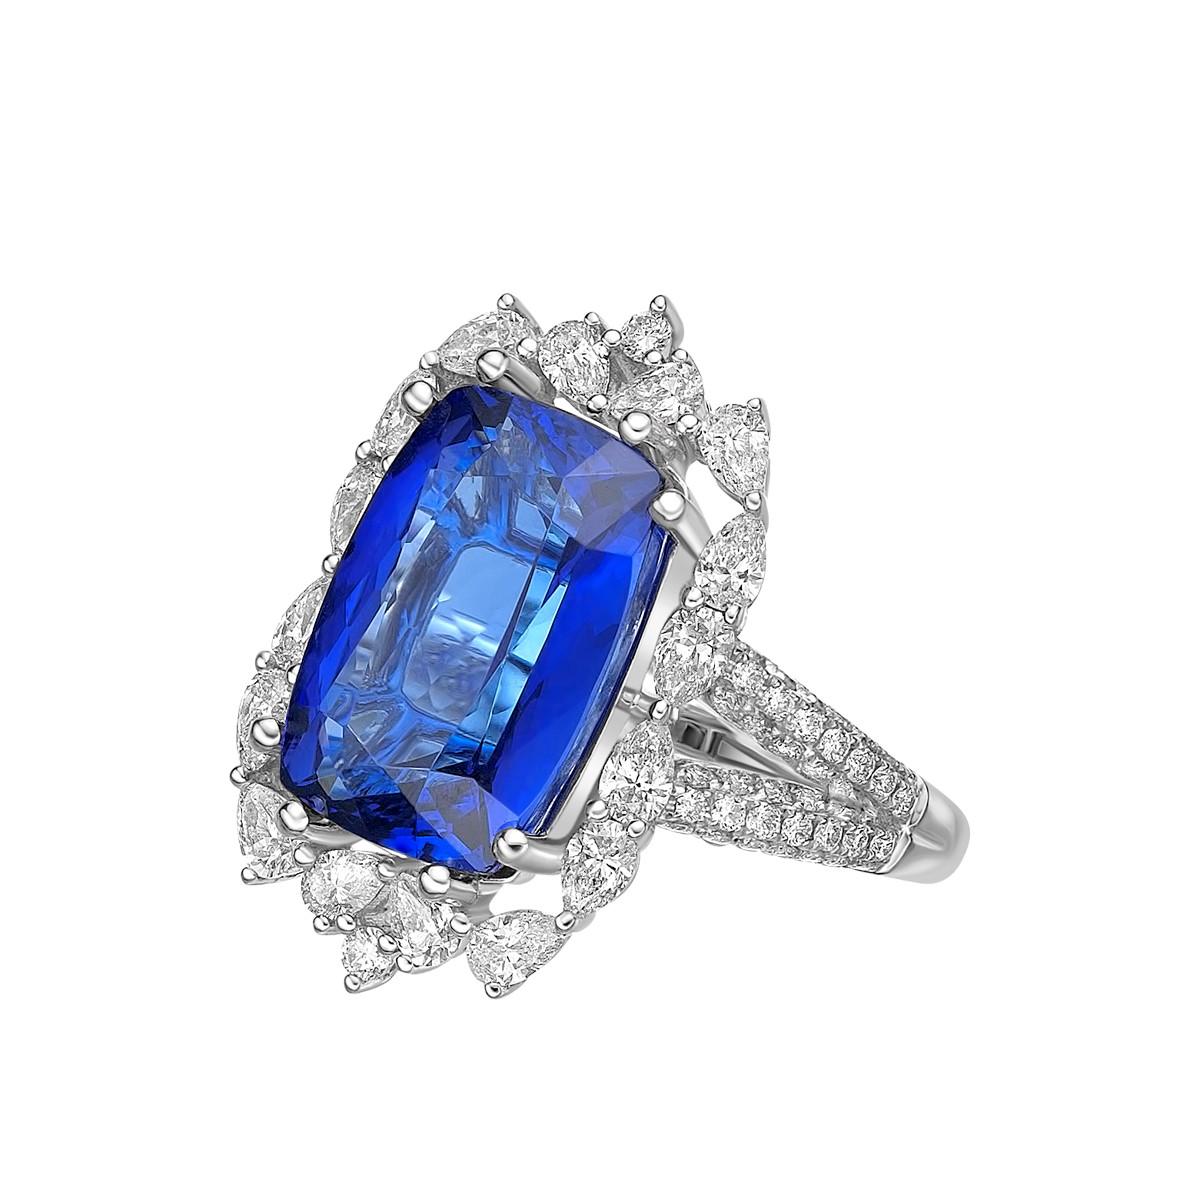 Cushion Cut Art Deco Style Tanzanite Ring with Diamond in 18 Karat White Gold. For Sale